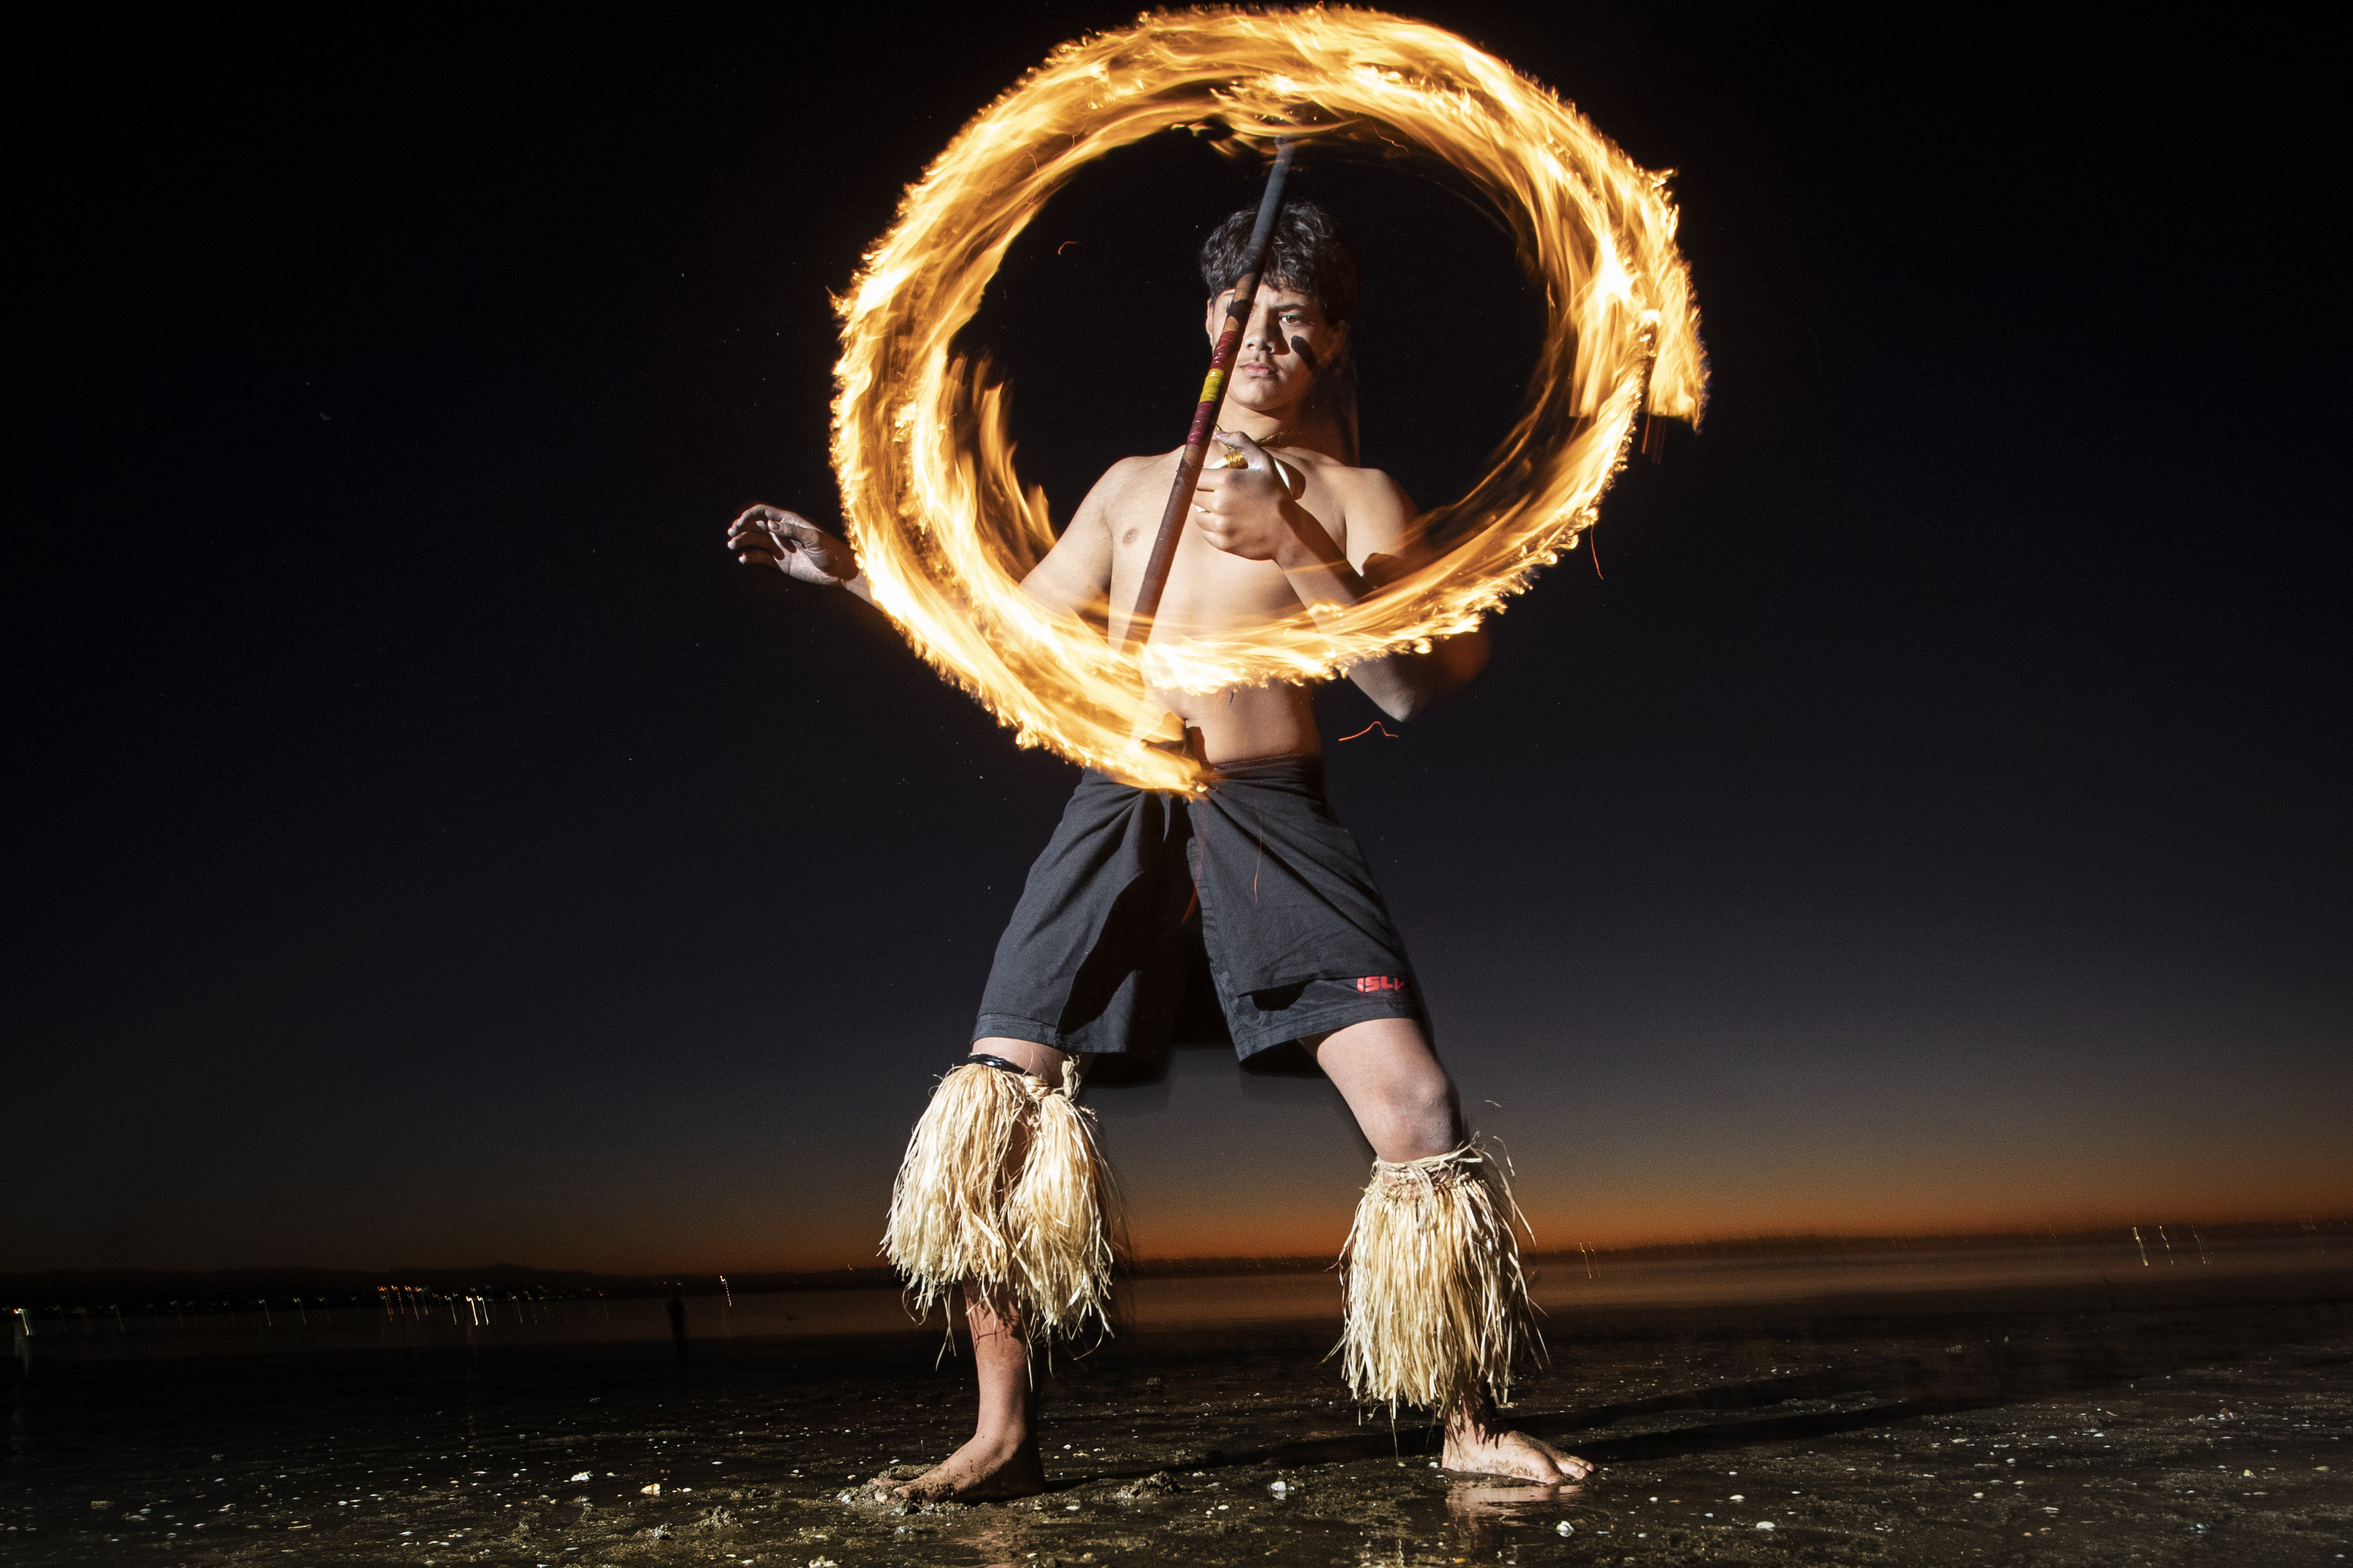 Tahi Mana member DJ Papalii performs Siva Afi or the Samoan Fire knife dance at sunset on Point Chevalier Beach by Jason Oxenham - NZ Herald photographer